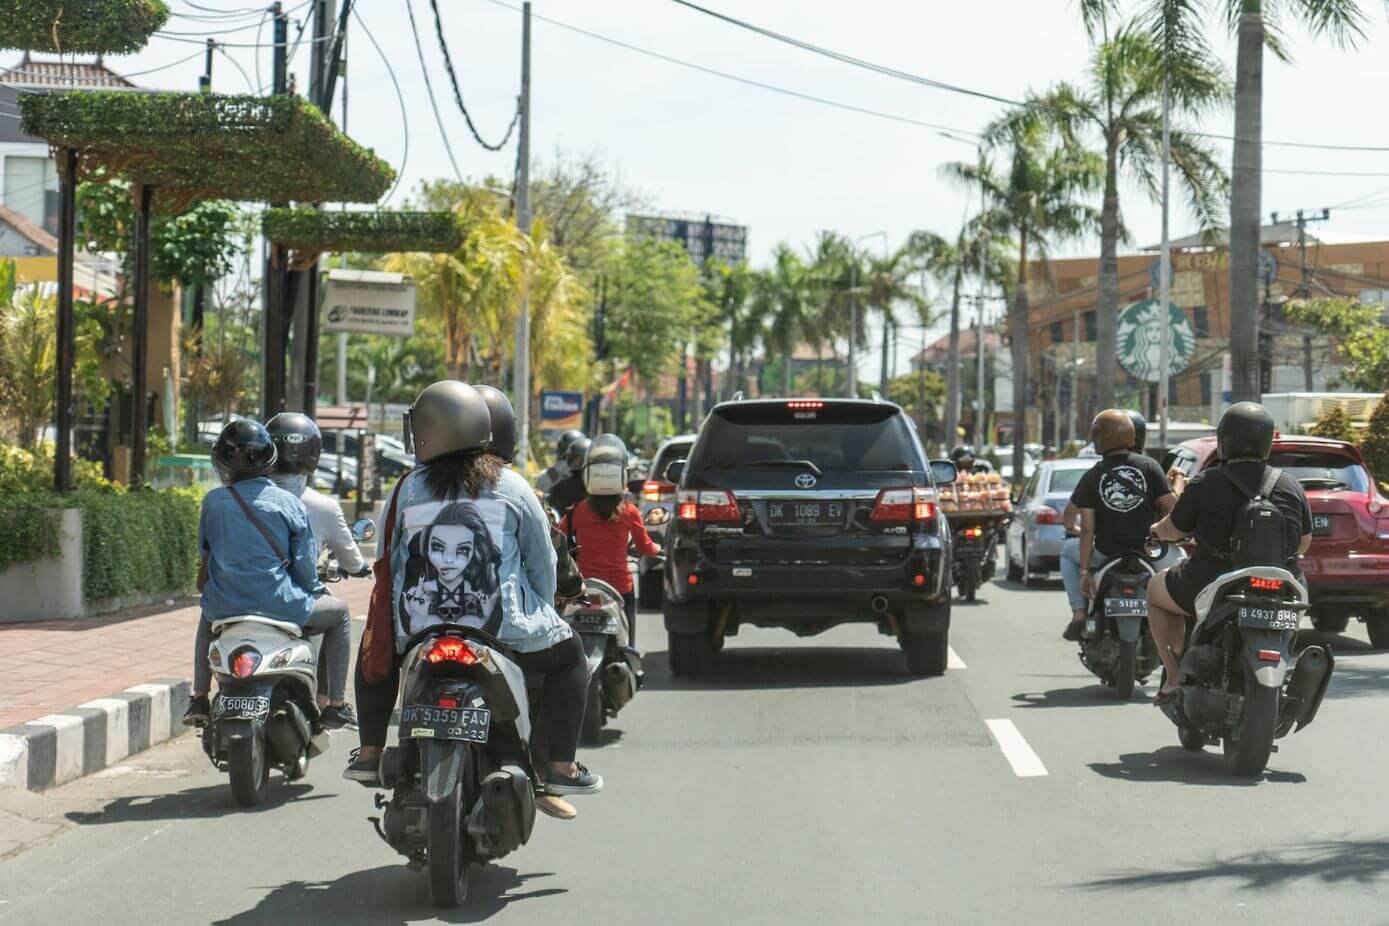 Transport in Bali - Scooters